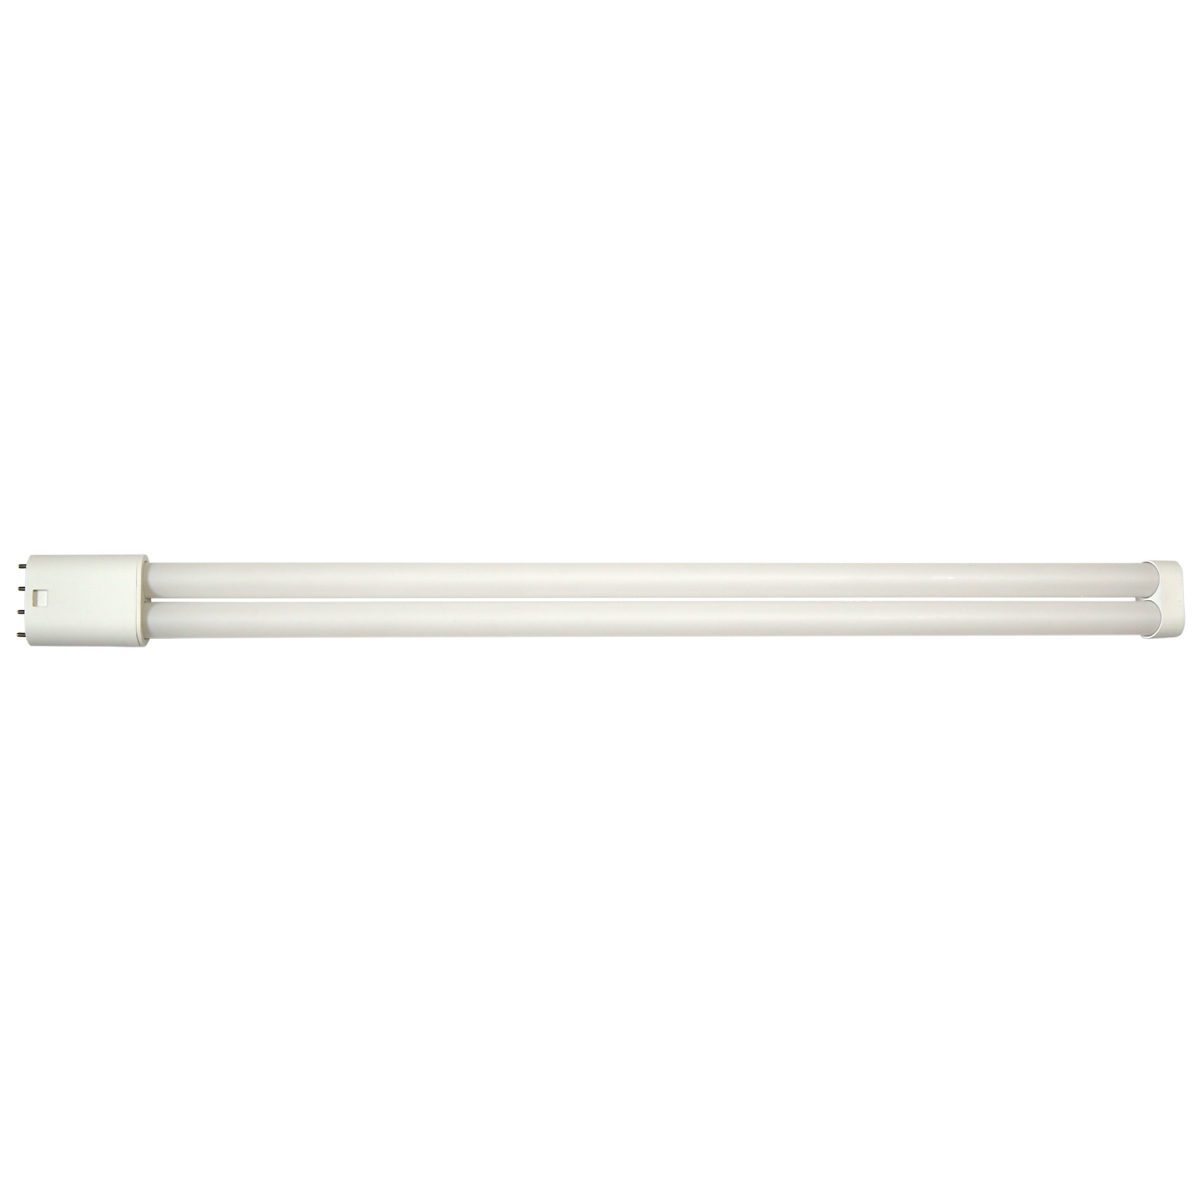 Glass Ballast Bypass LED PLL Lamp 23W, 2600LM, 5000K, Replacement for 40 Watt Compact Fluorescent